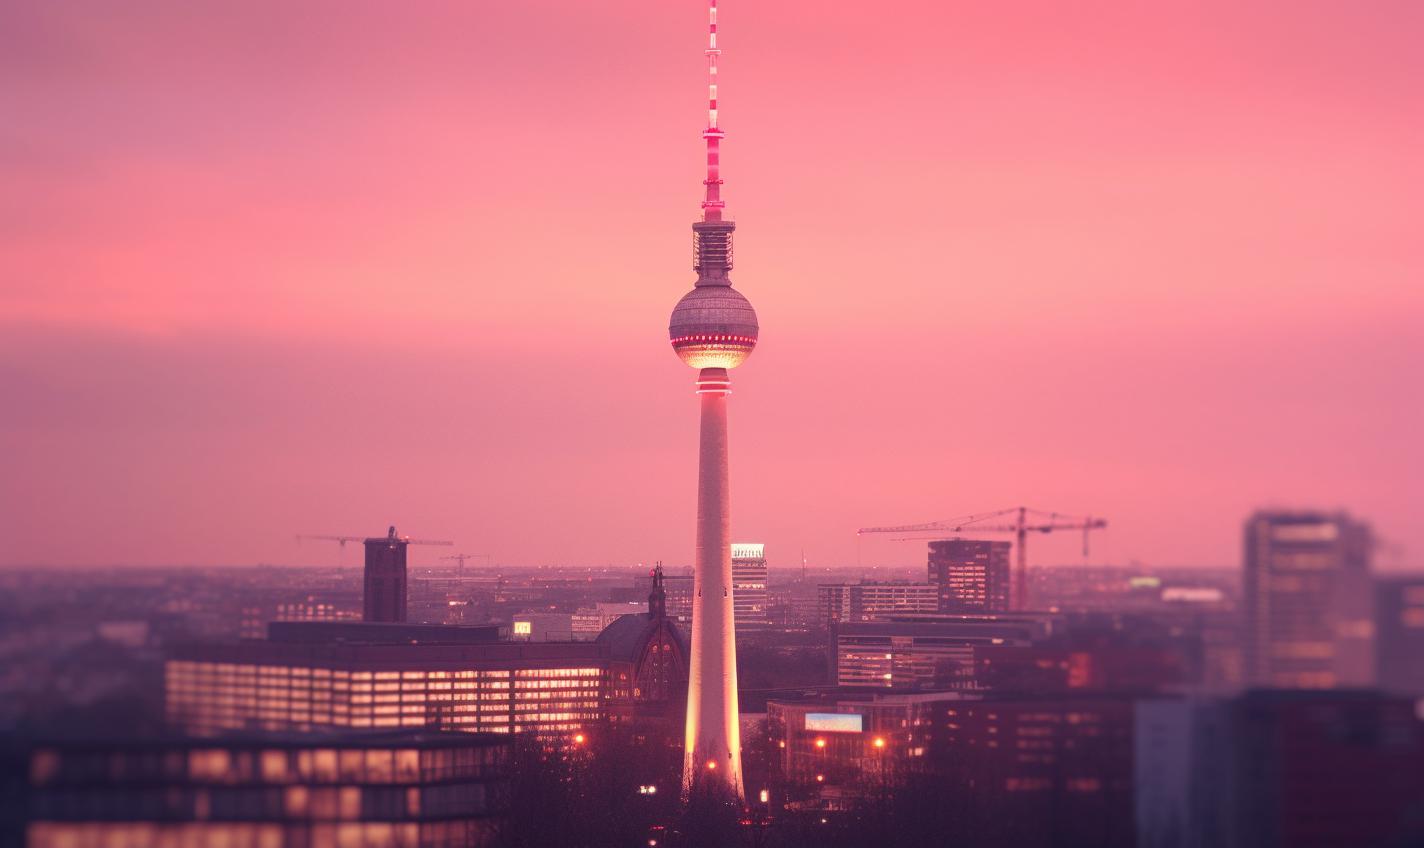 Midjourney prompt: 'the image shows an berlin skyline and a television tower, in the style of ebru sidar, movie poster, dan flavin, sony fe 12-24mm f/2.8 gm, #screenshotsaturday, light maroon --ar 27:16 --s 750 '